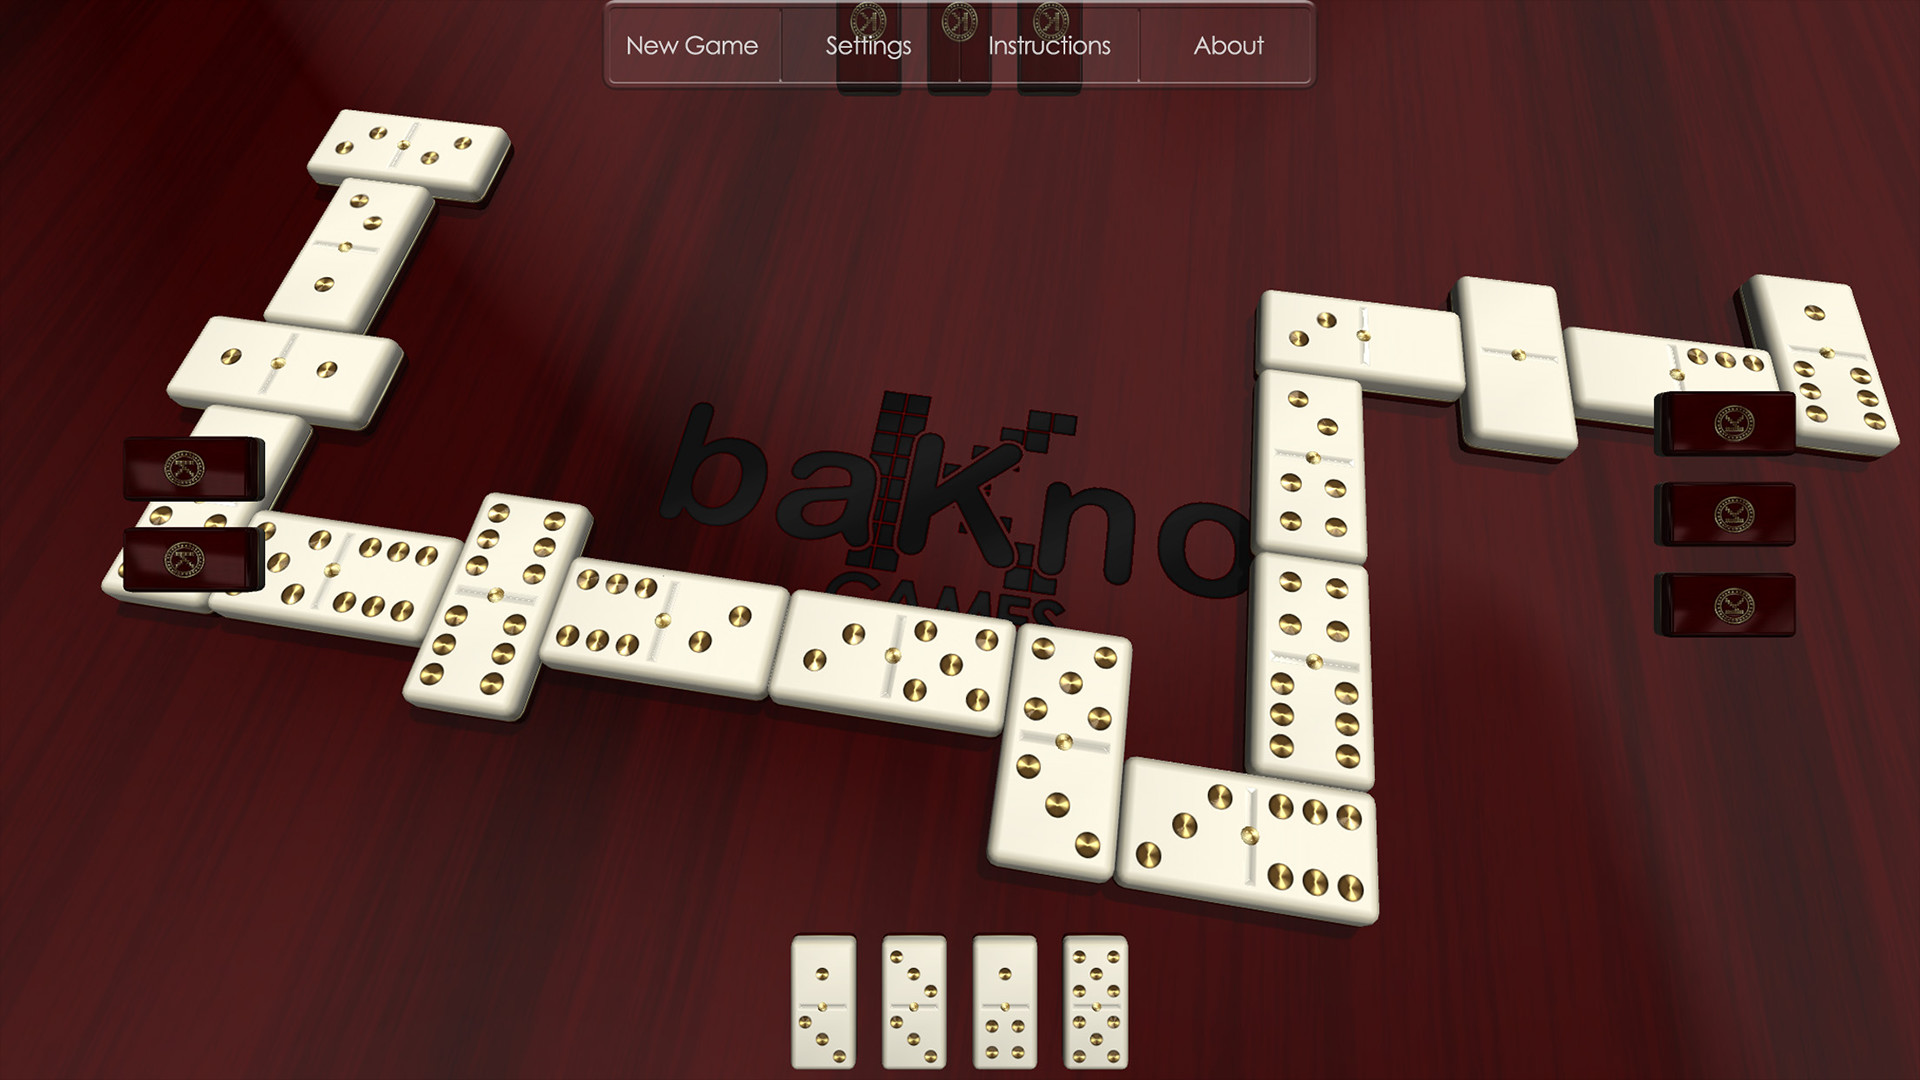 Domino Multiplayer for windows download free